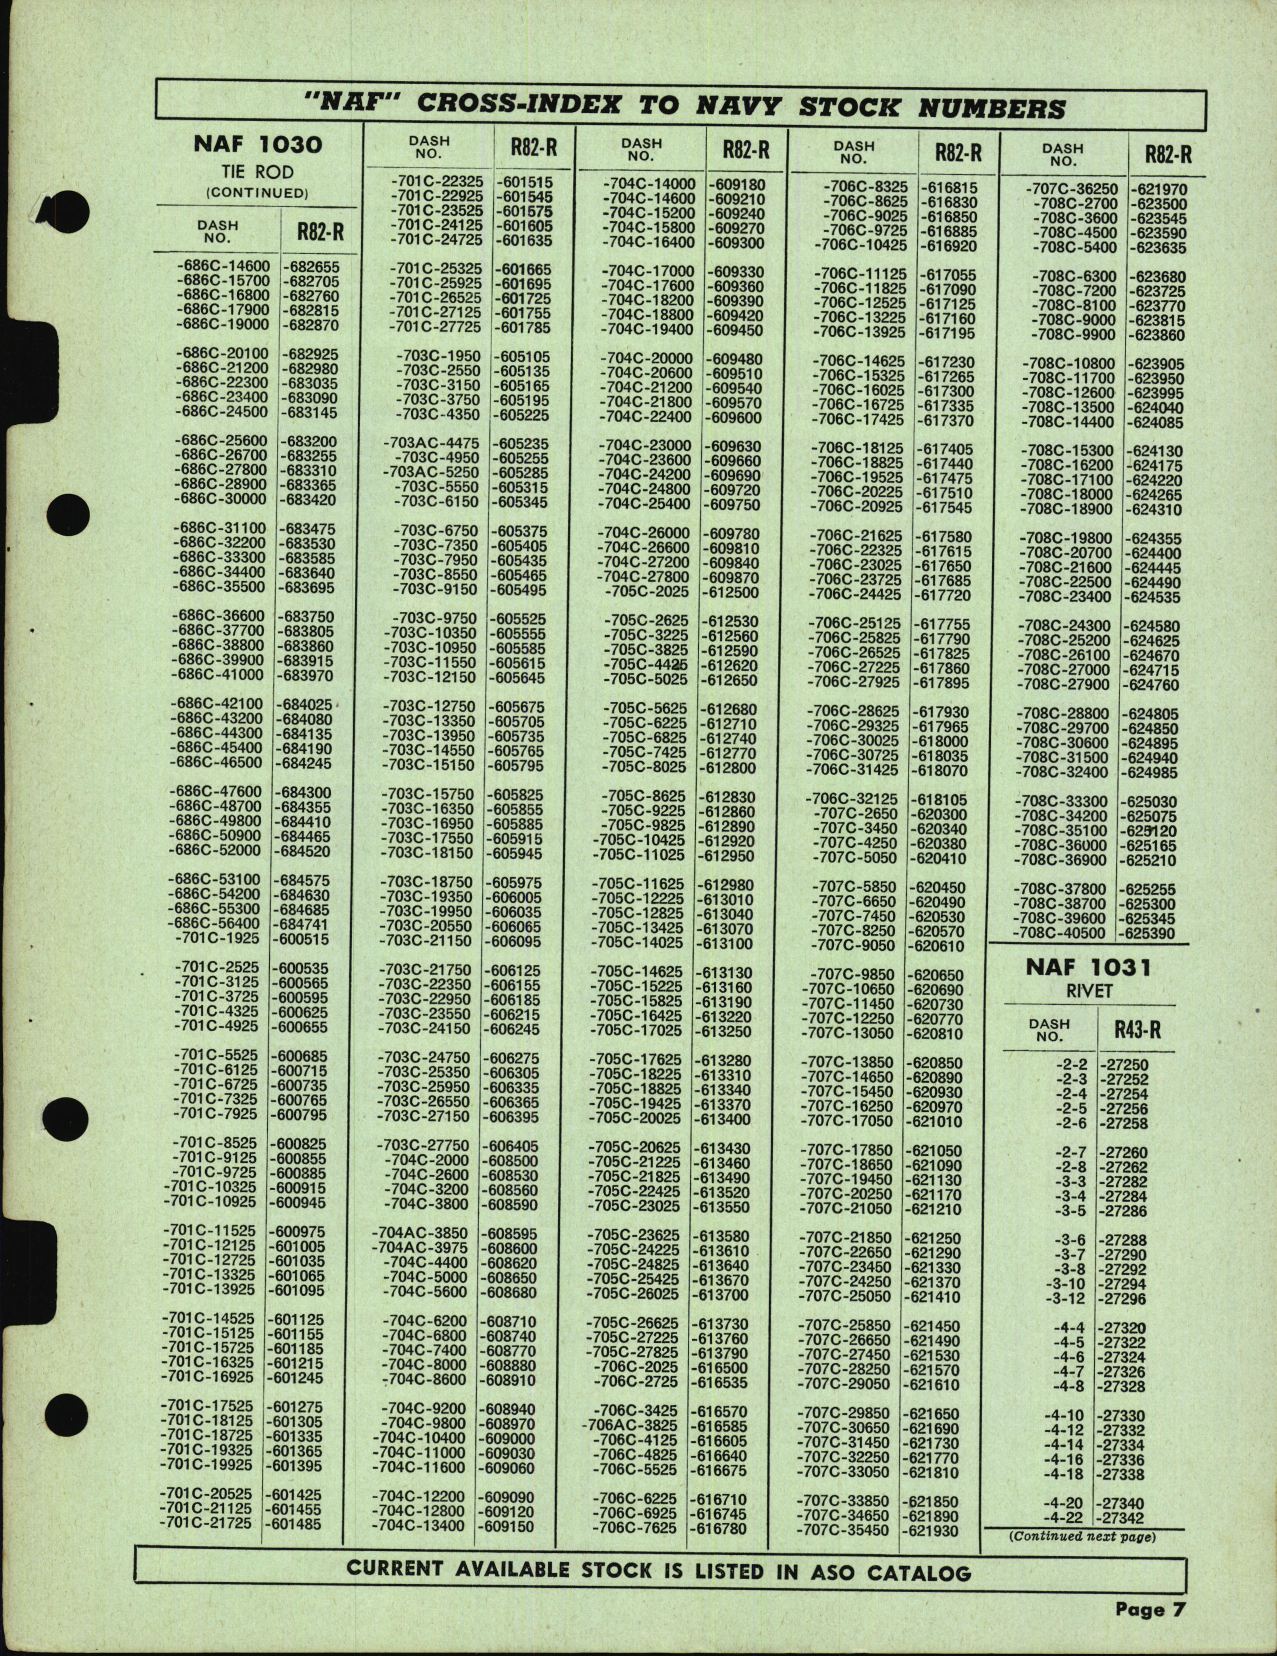 Sample page 7 from AirCorps Library document: NAF to Navy Stock Numbers Cross Index